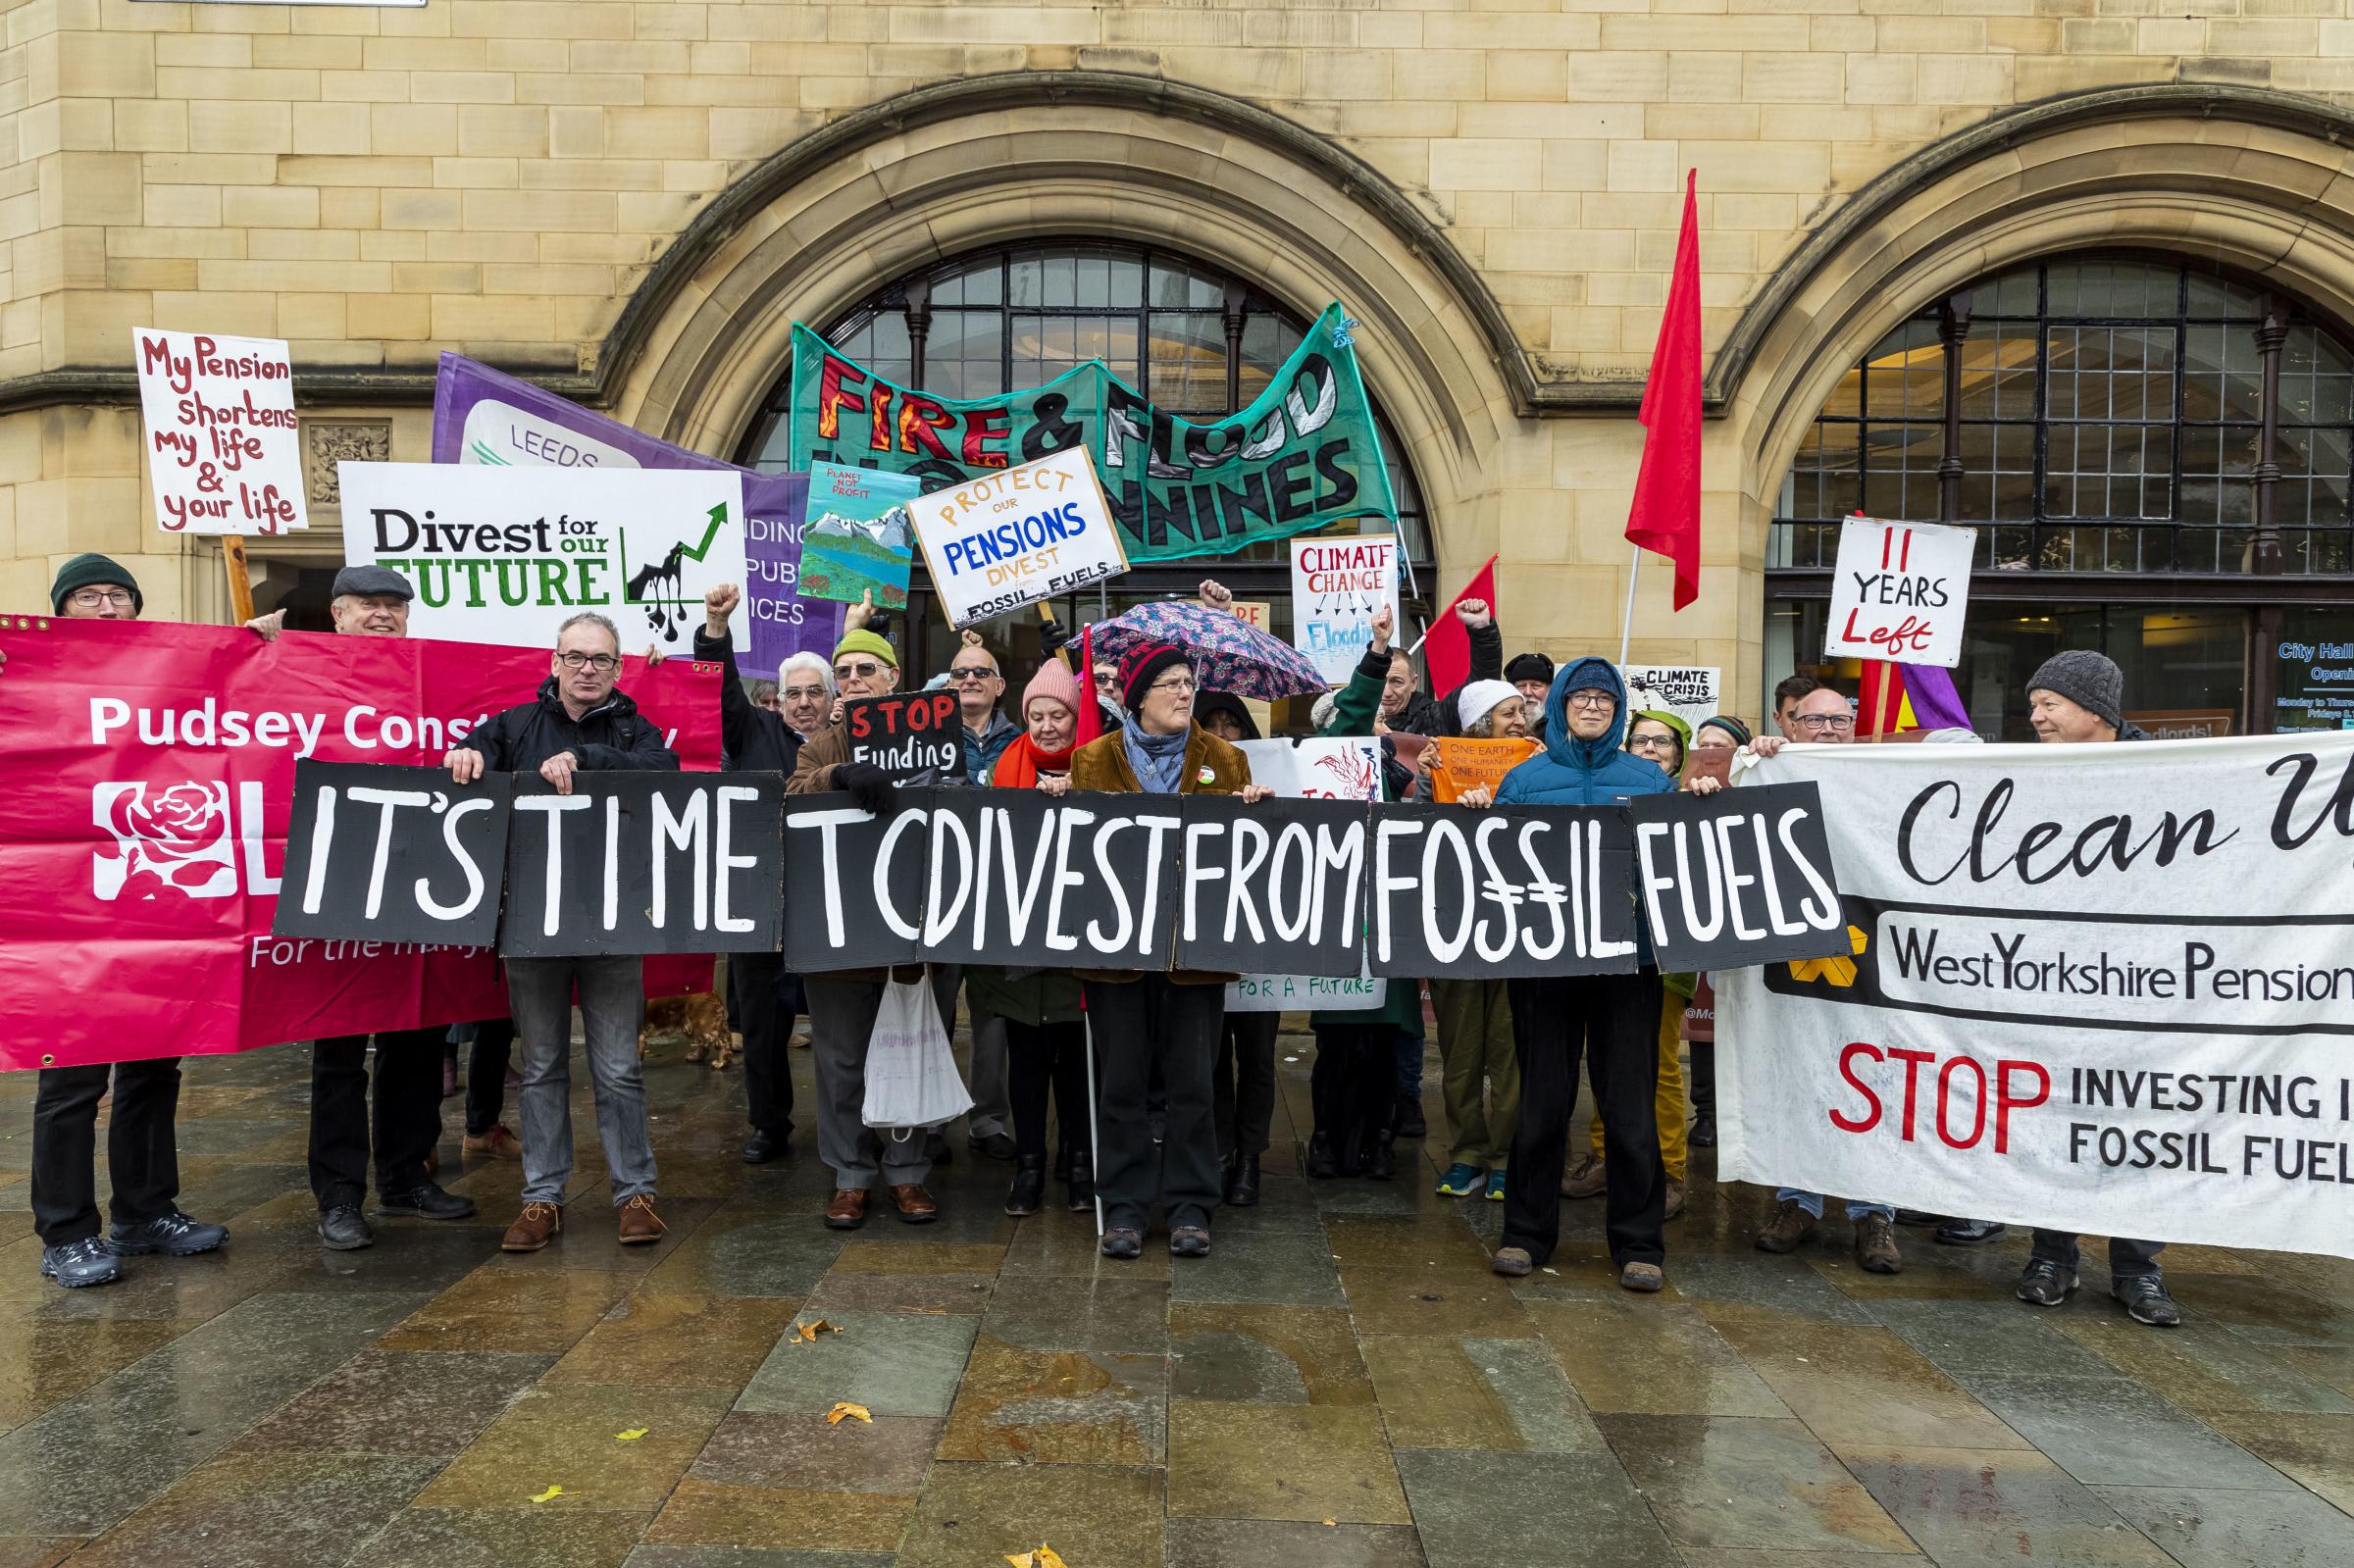 Protesters in Bradford call for West Yorkshire Pension Fund fossil fuel divestment